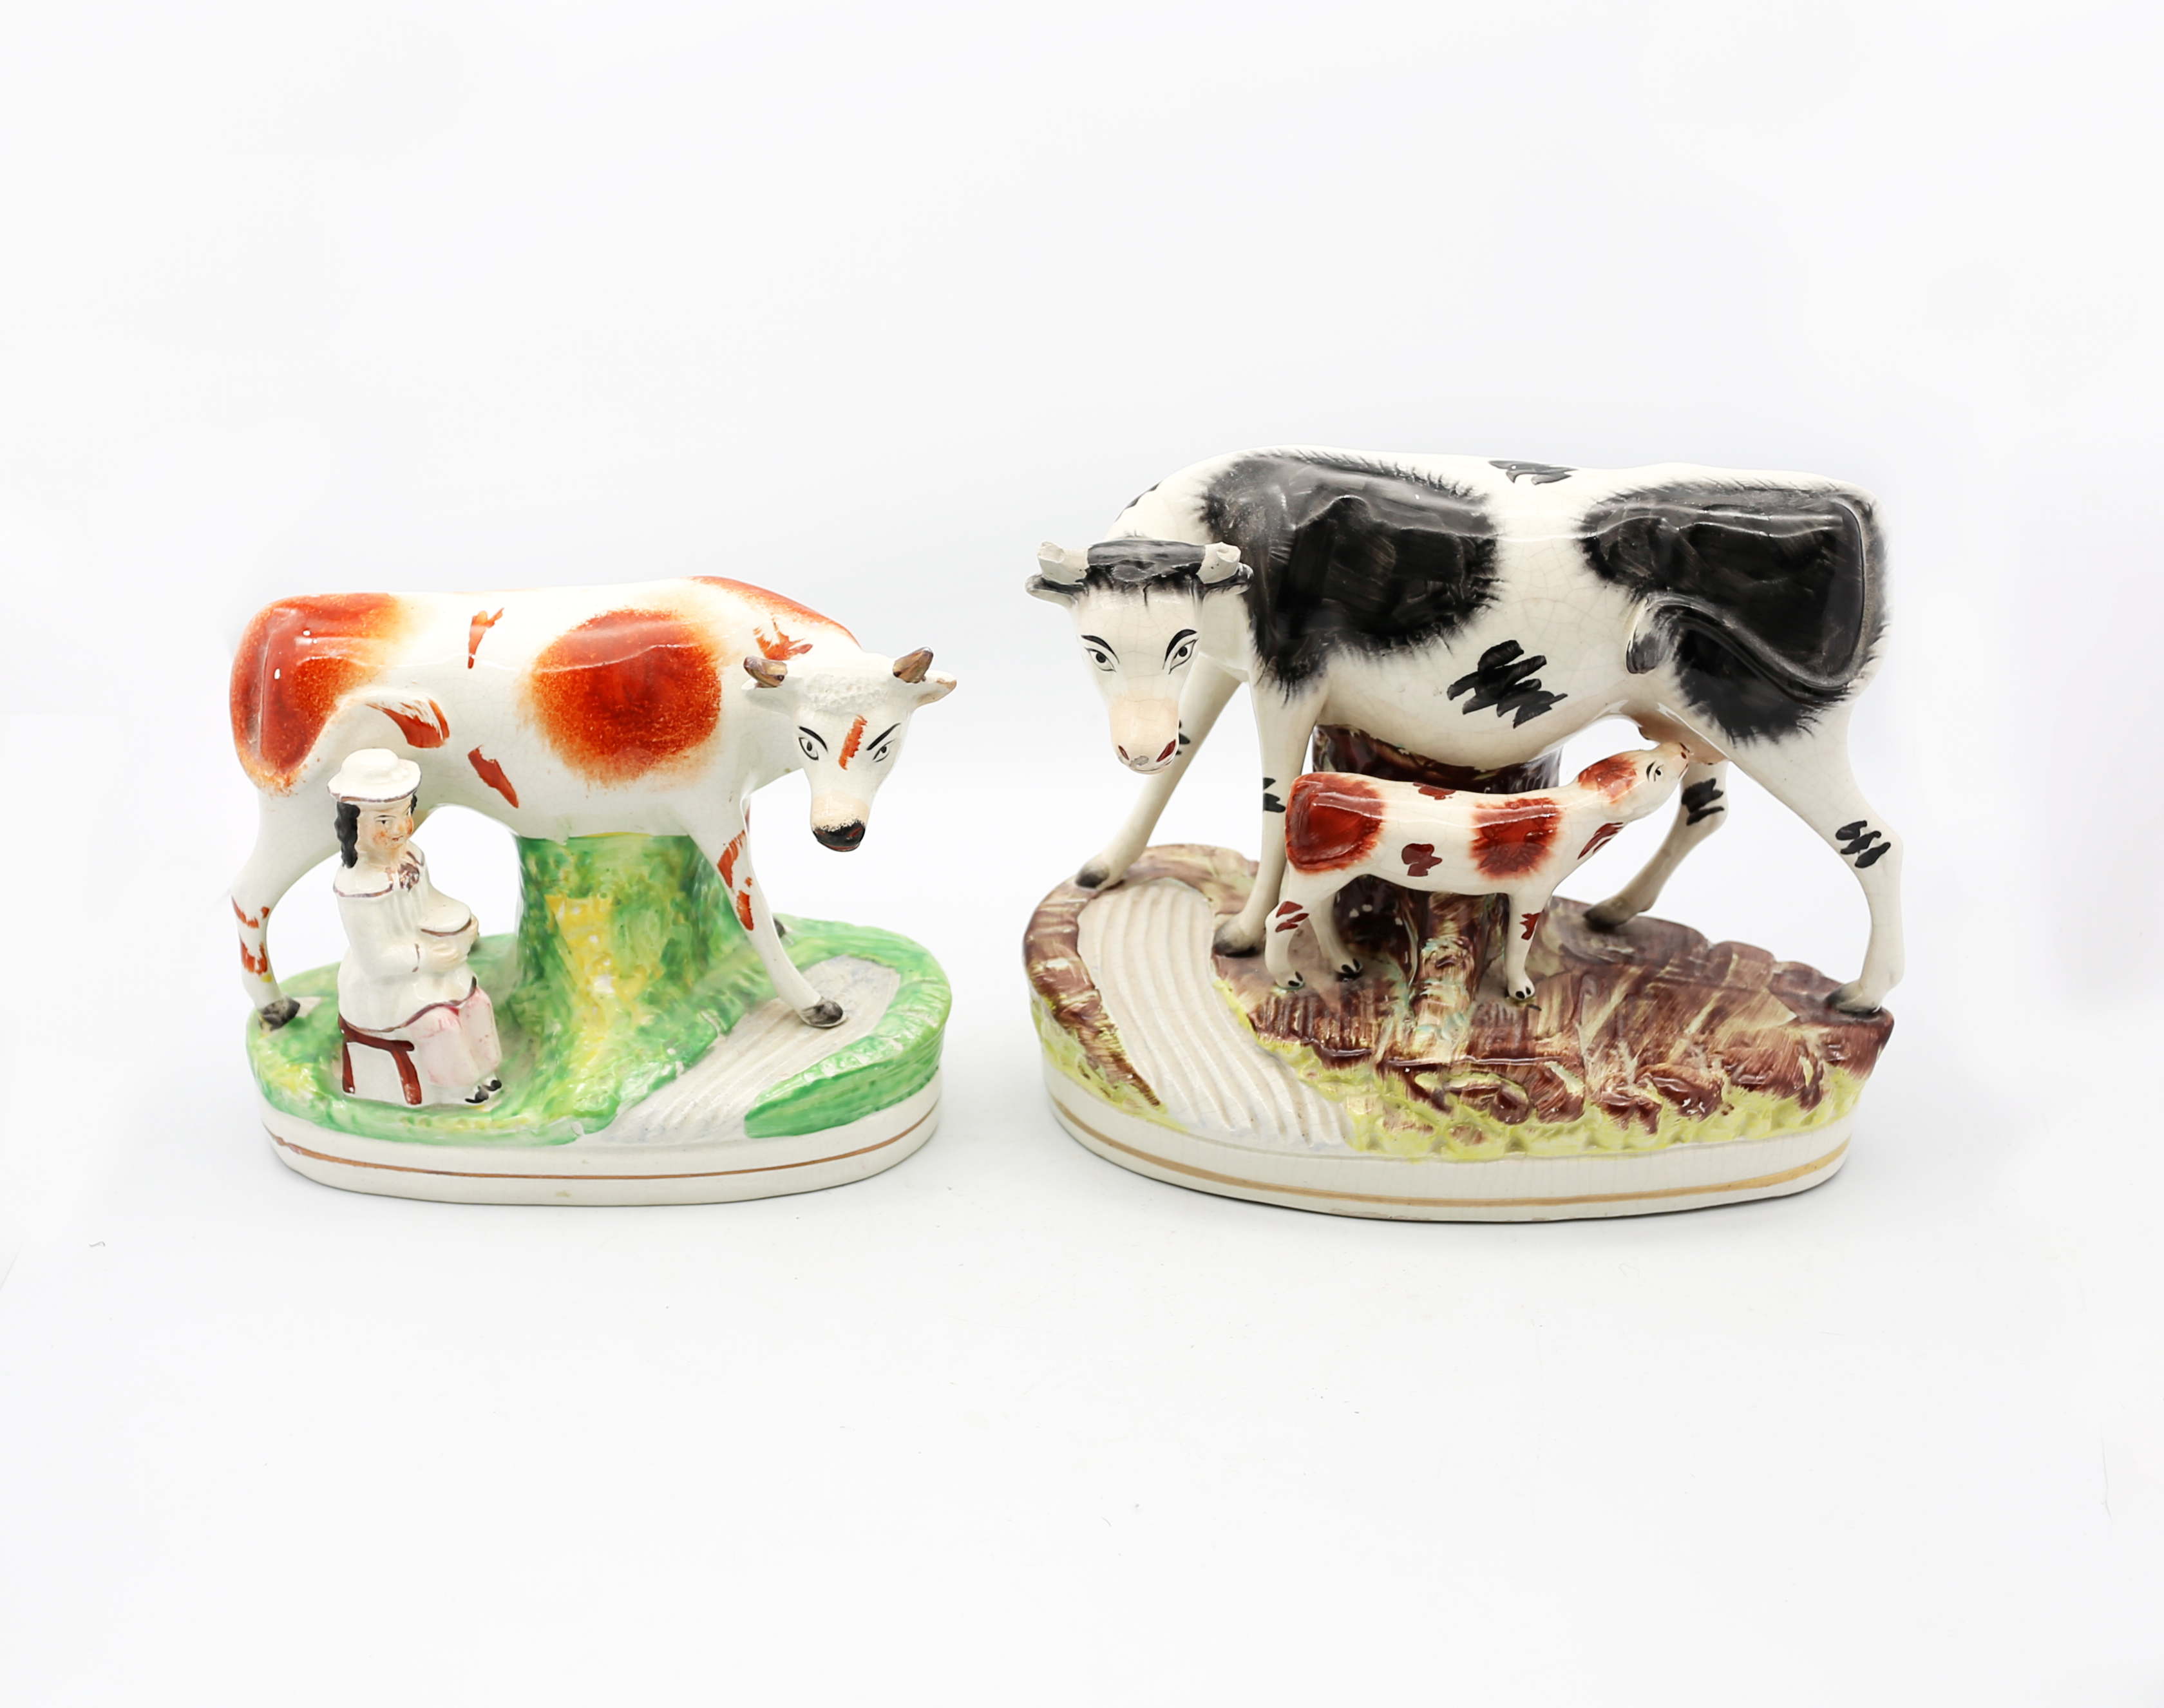 A Victorian Staffordshire pottery Cow and suckling calf standing on a grassy mound by a brook, along